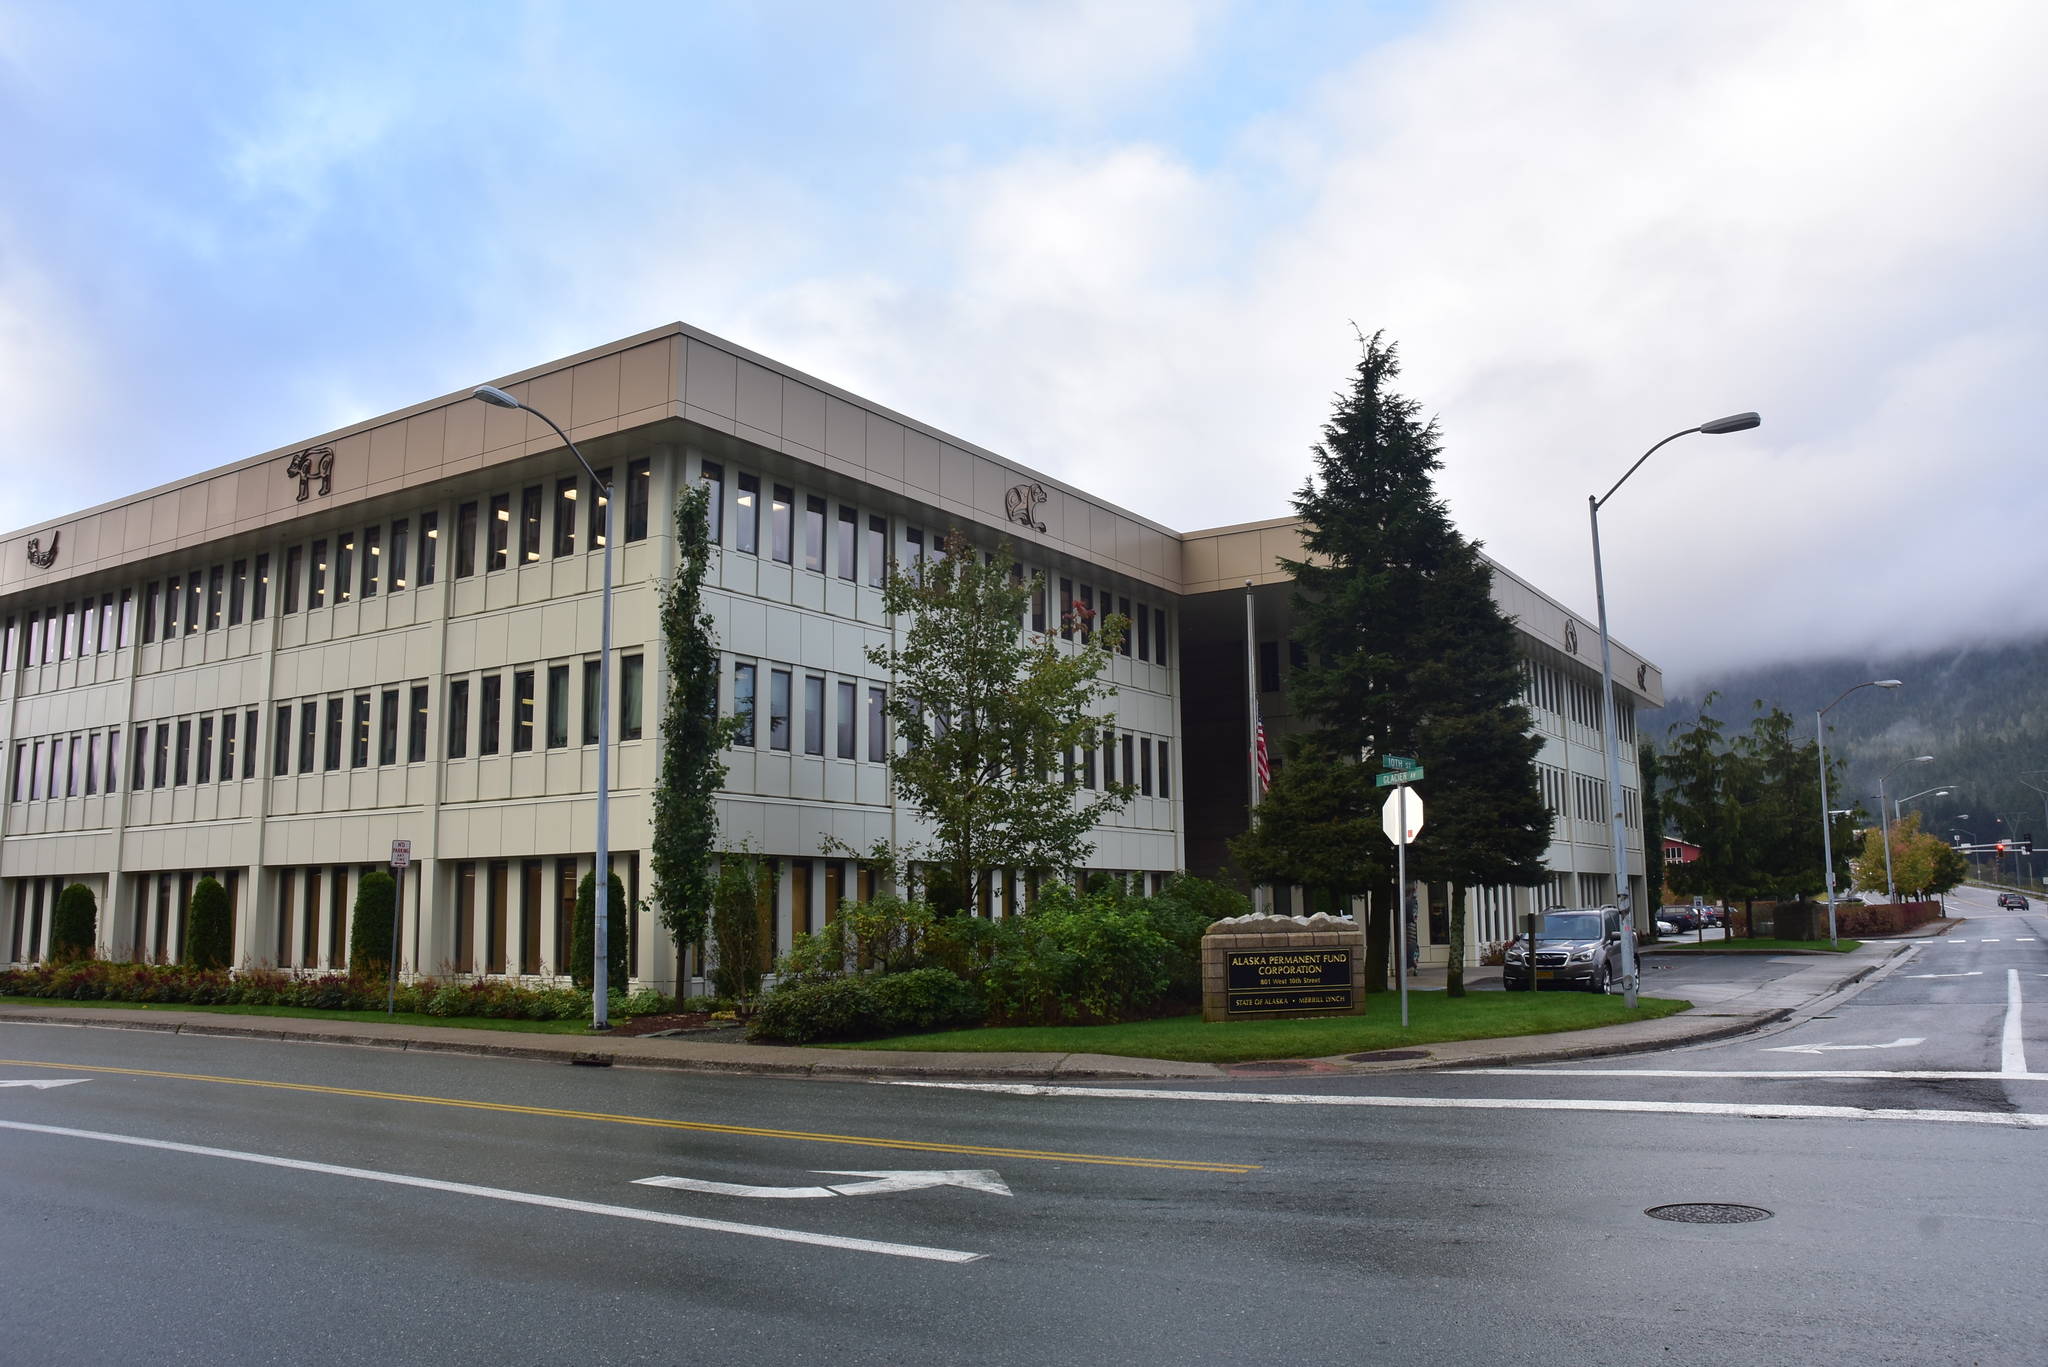 The Alaska Permanent Fund Corporation building in Juneau on Thursday, October 1, 2020. The corporation’s CEO Angela Rodell spoke to the Juneau Chamber of Commerce Thursday saying the fund had remained strong during the pandemic in large part due to prudent management and past investments in the fund itself. (Peter Segall / Juneau Empire)